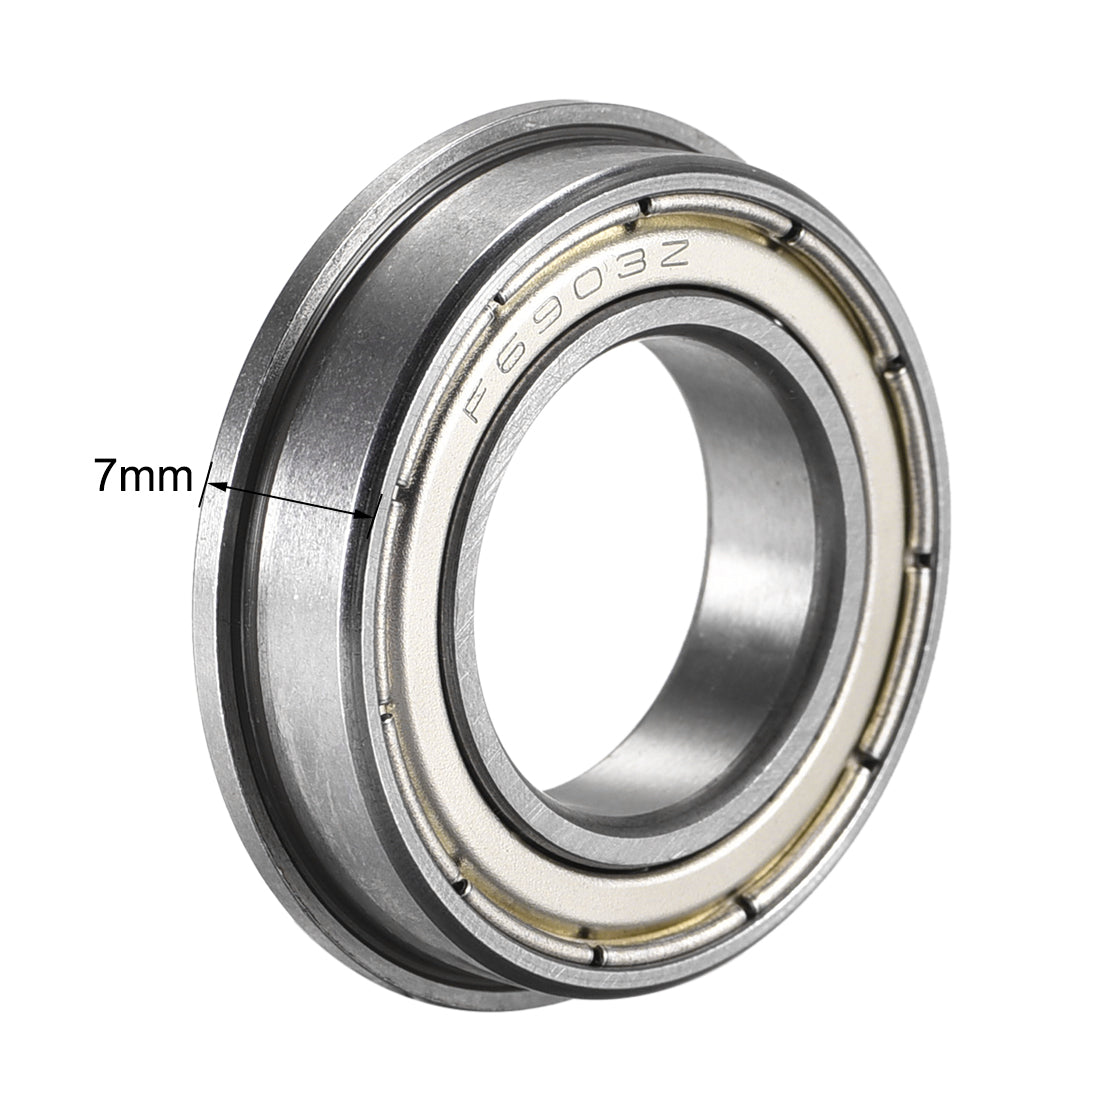 uxcell Uxcell F6903ZZ Flange Ball Bearing 17x30x7mm Double Shielded Chrome Steel Bearings 2pcs